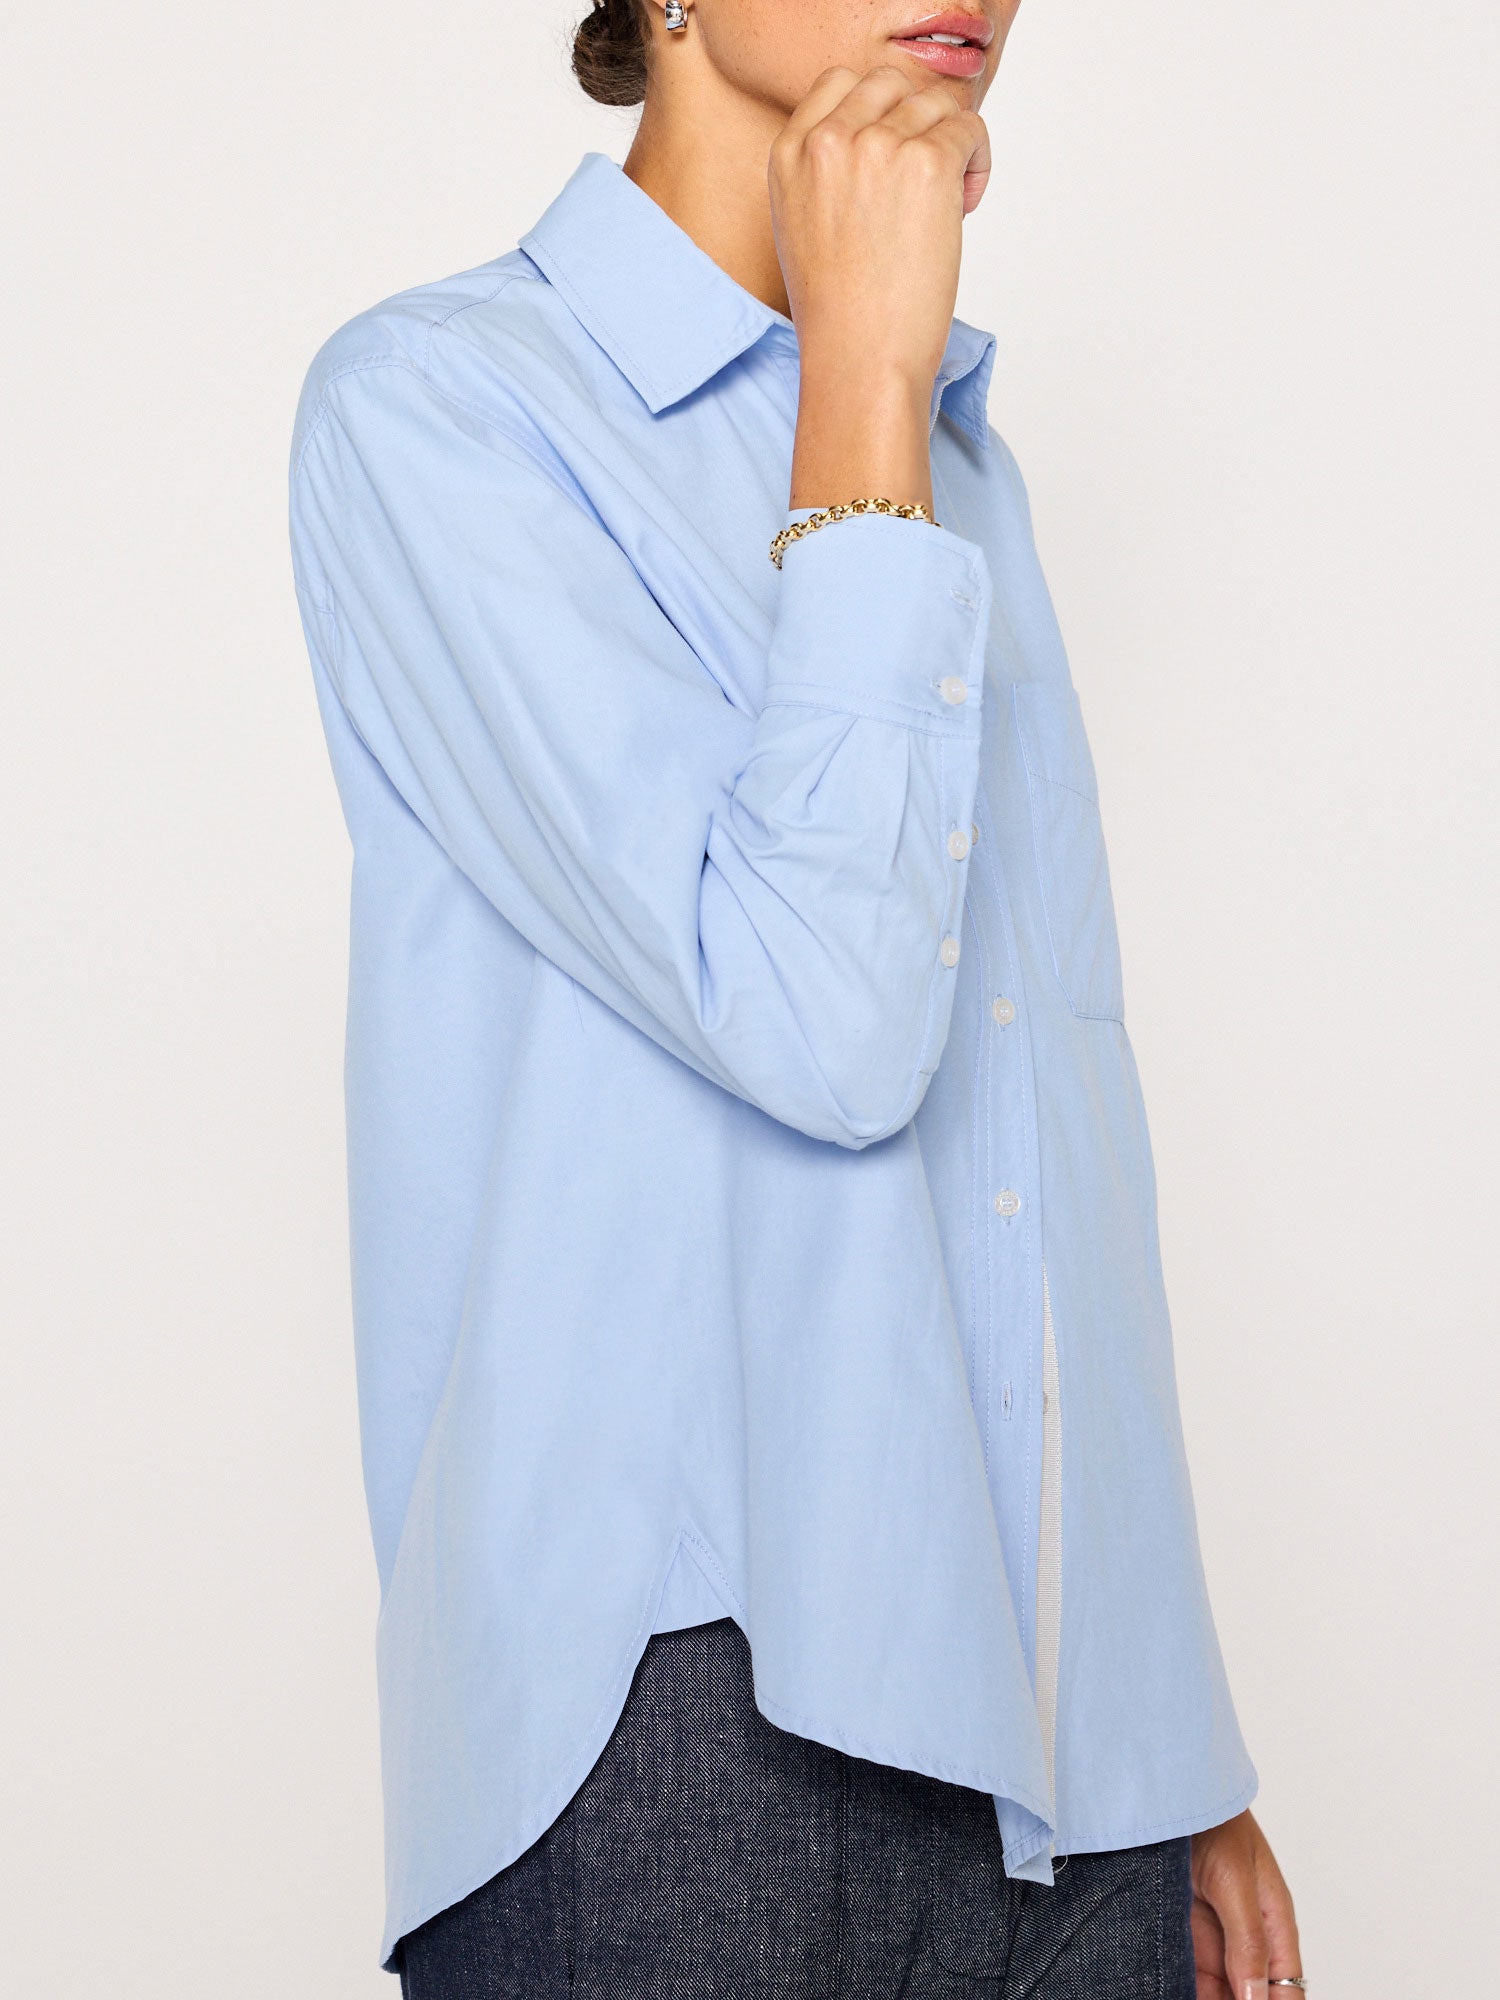 Everyday button up blue shirt side view